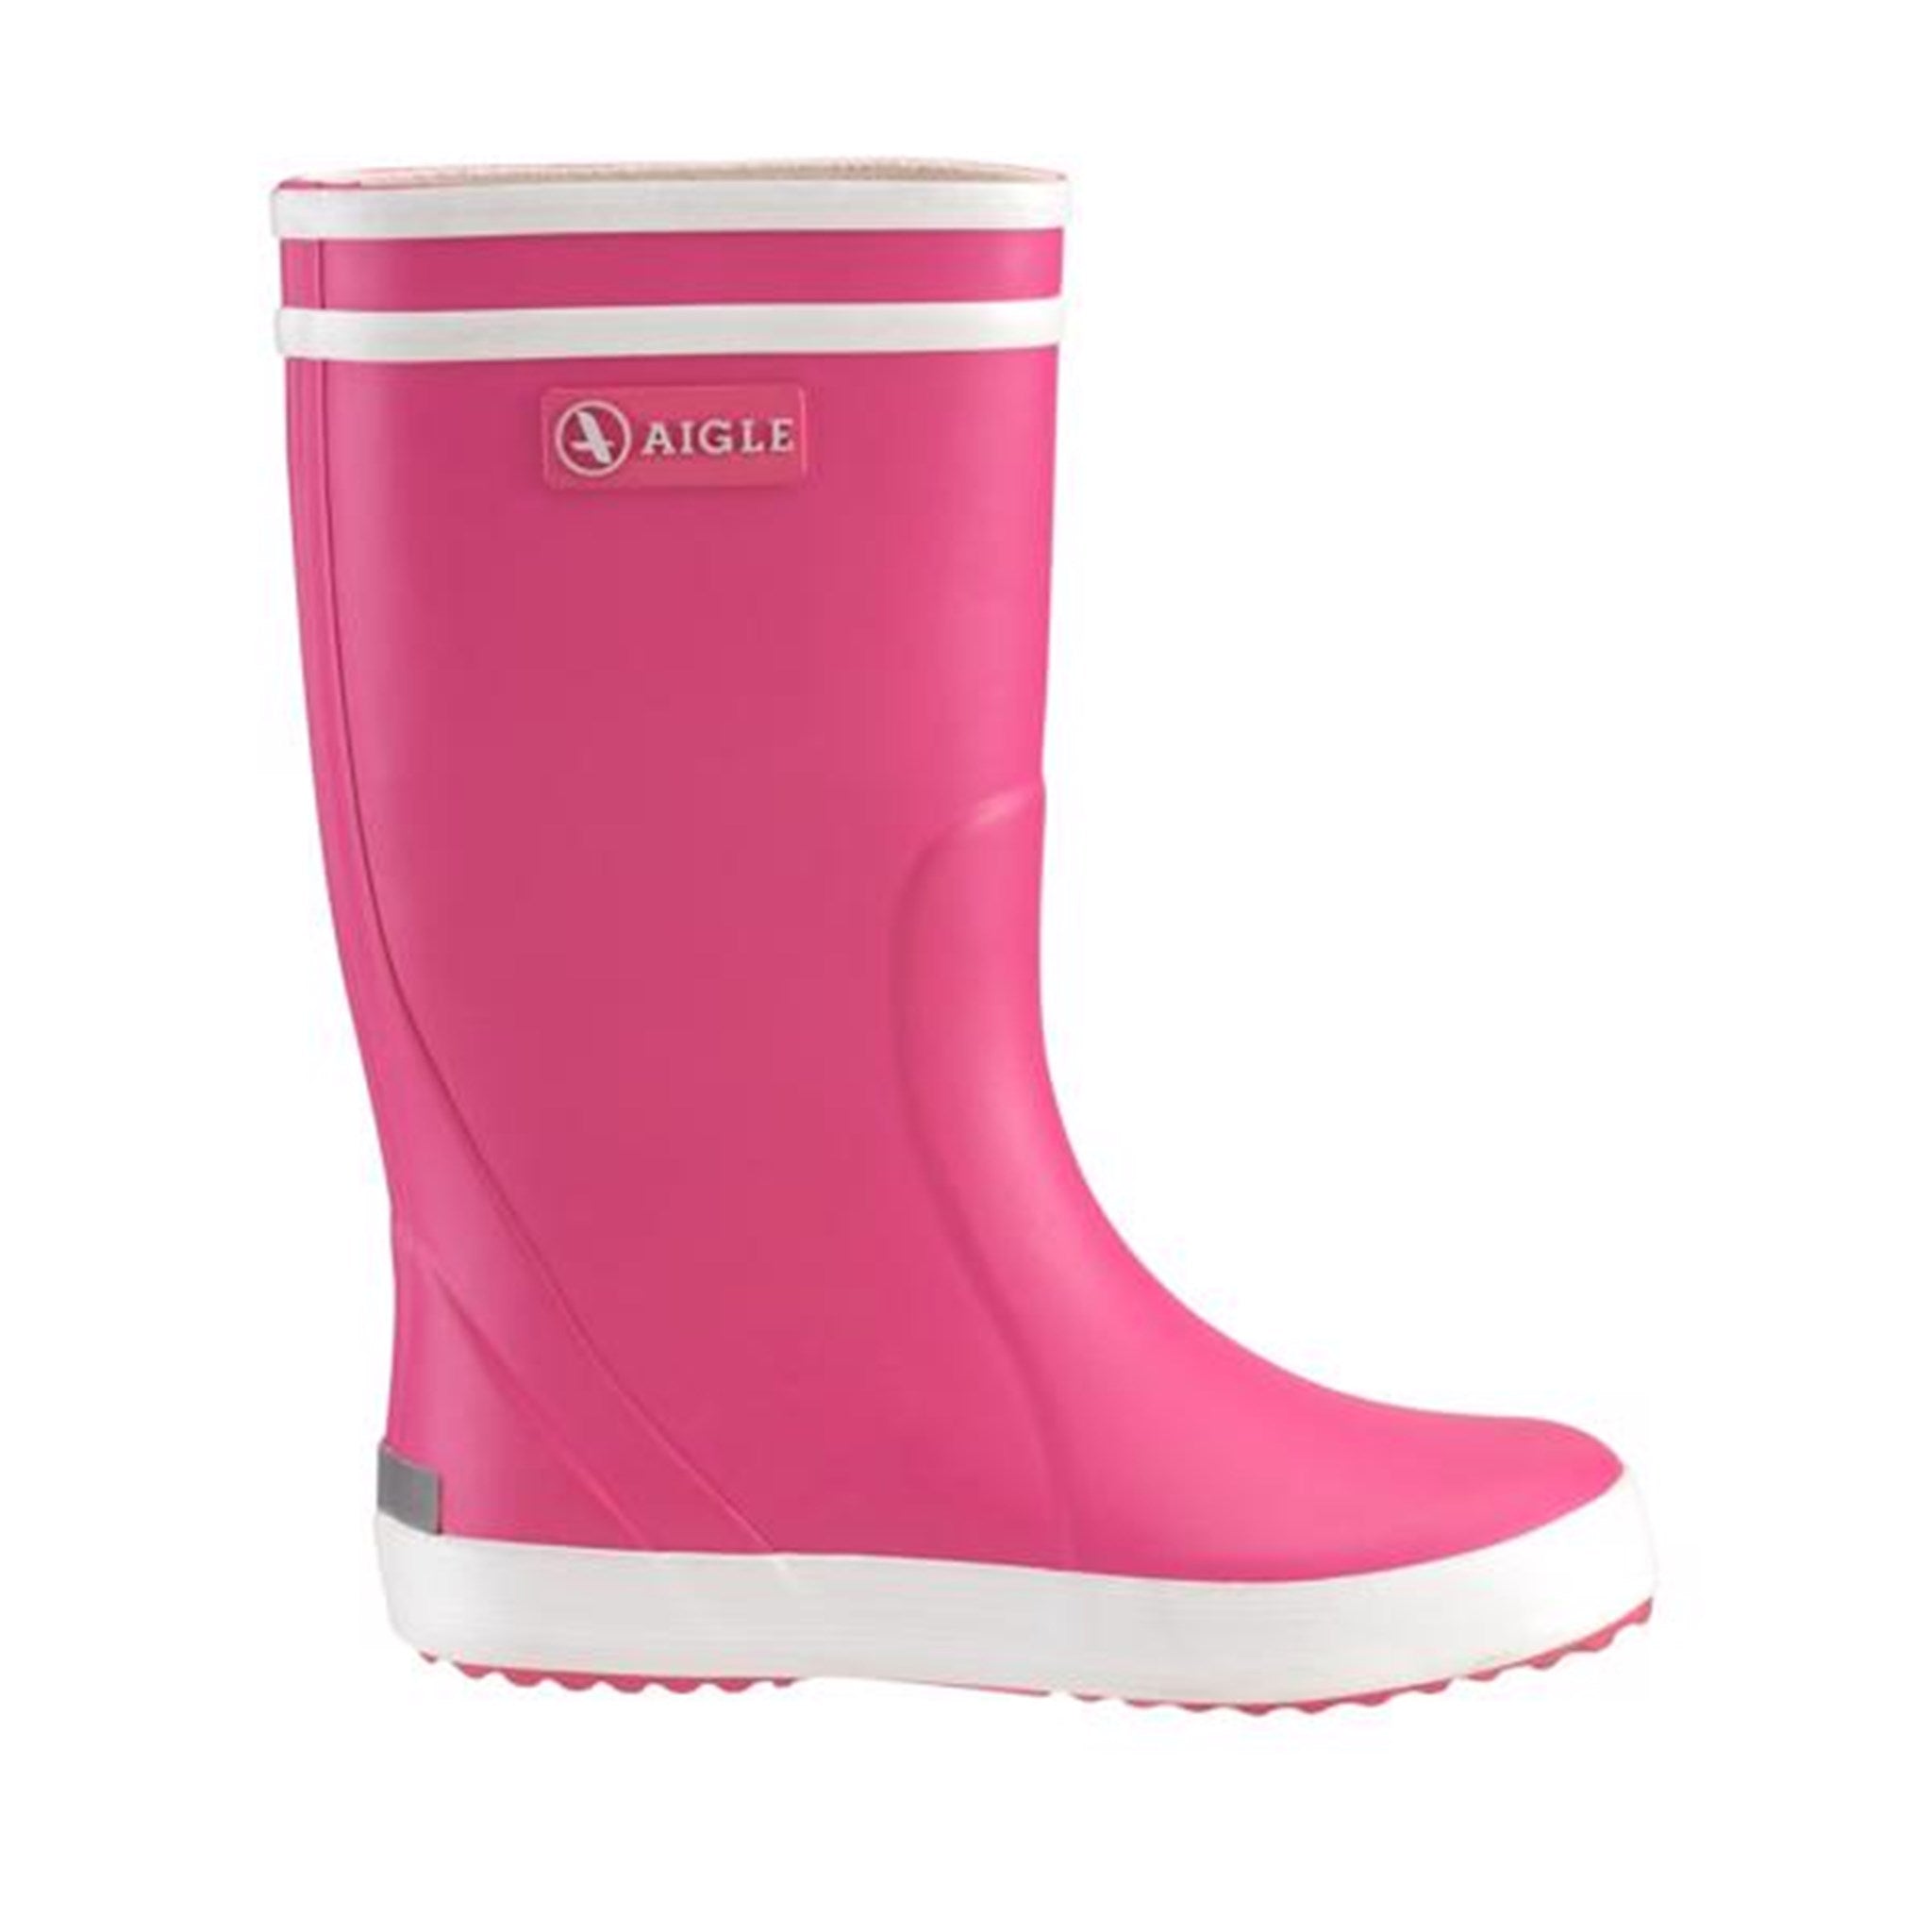 Aigle Lolly Pop Wellies Rose/Pink